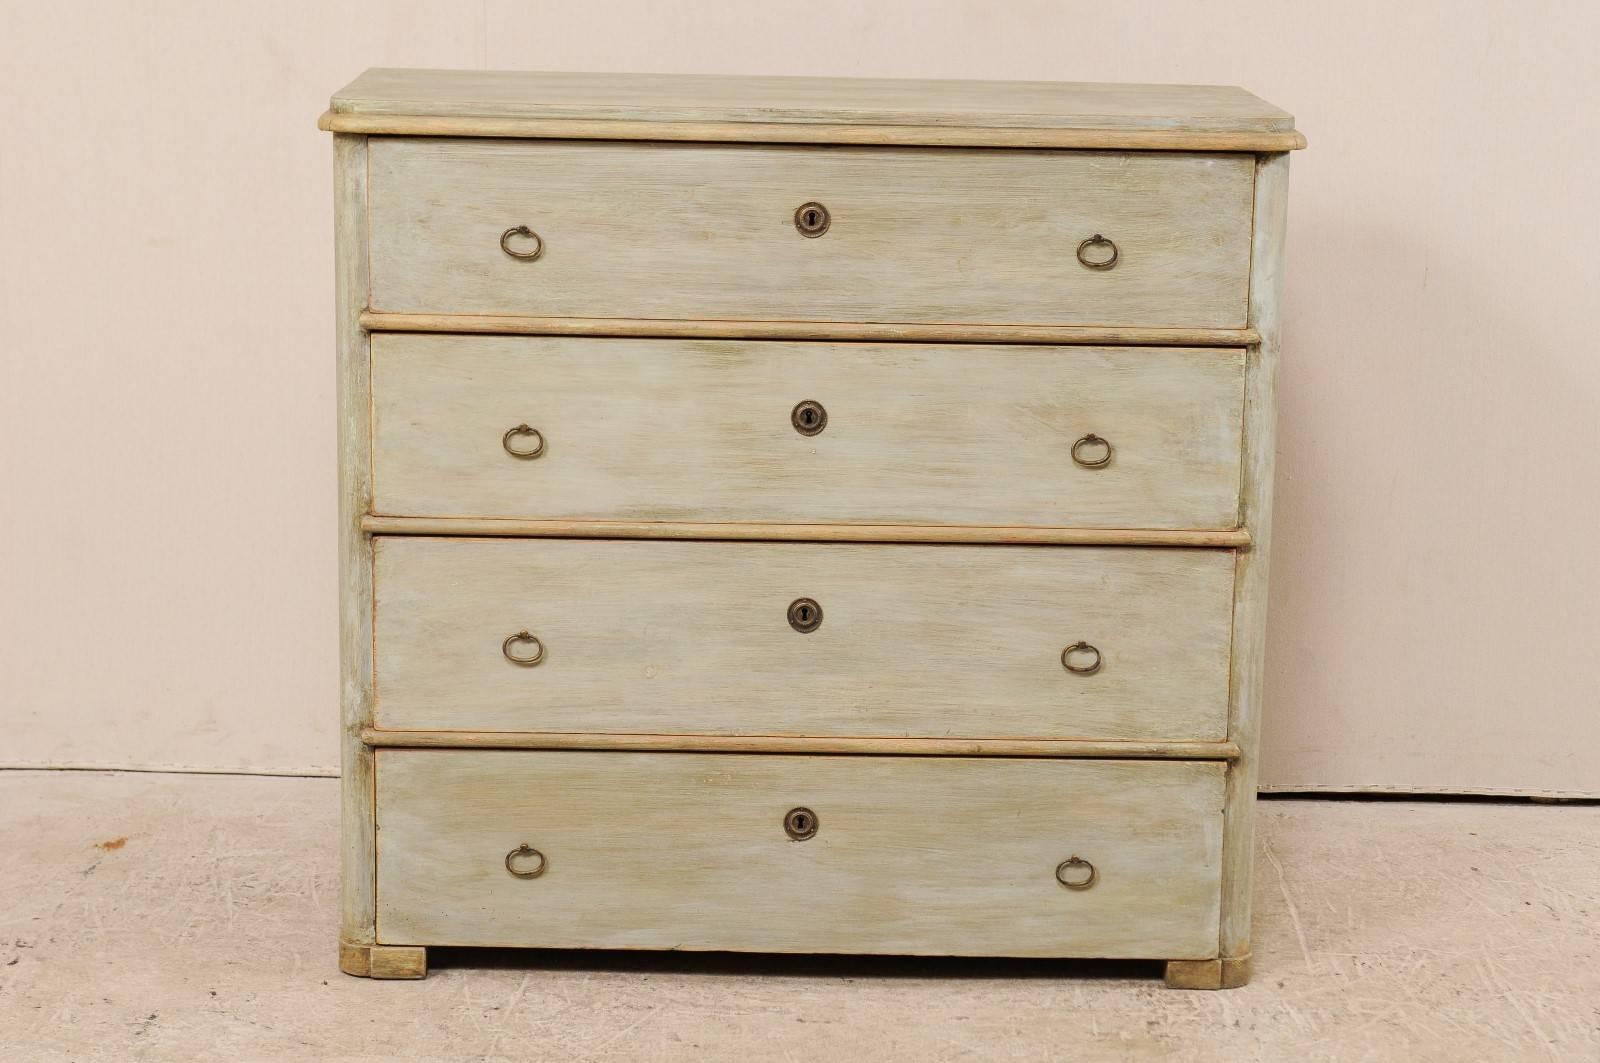 Carved Swedish 19th Century Four-Drawer Karl Johan Painted Wood Chest, circa 1840-1850